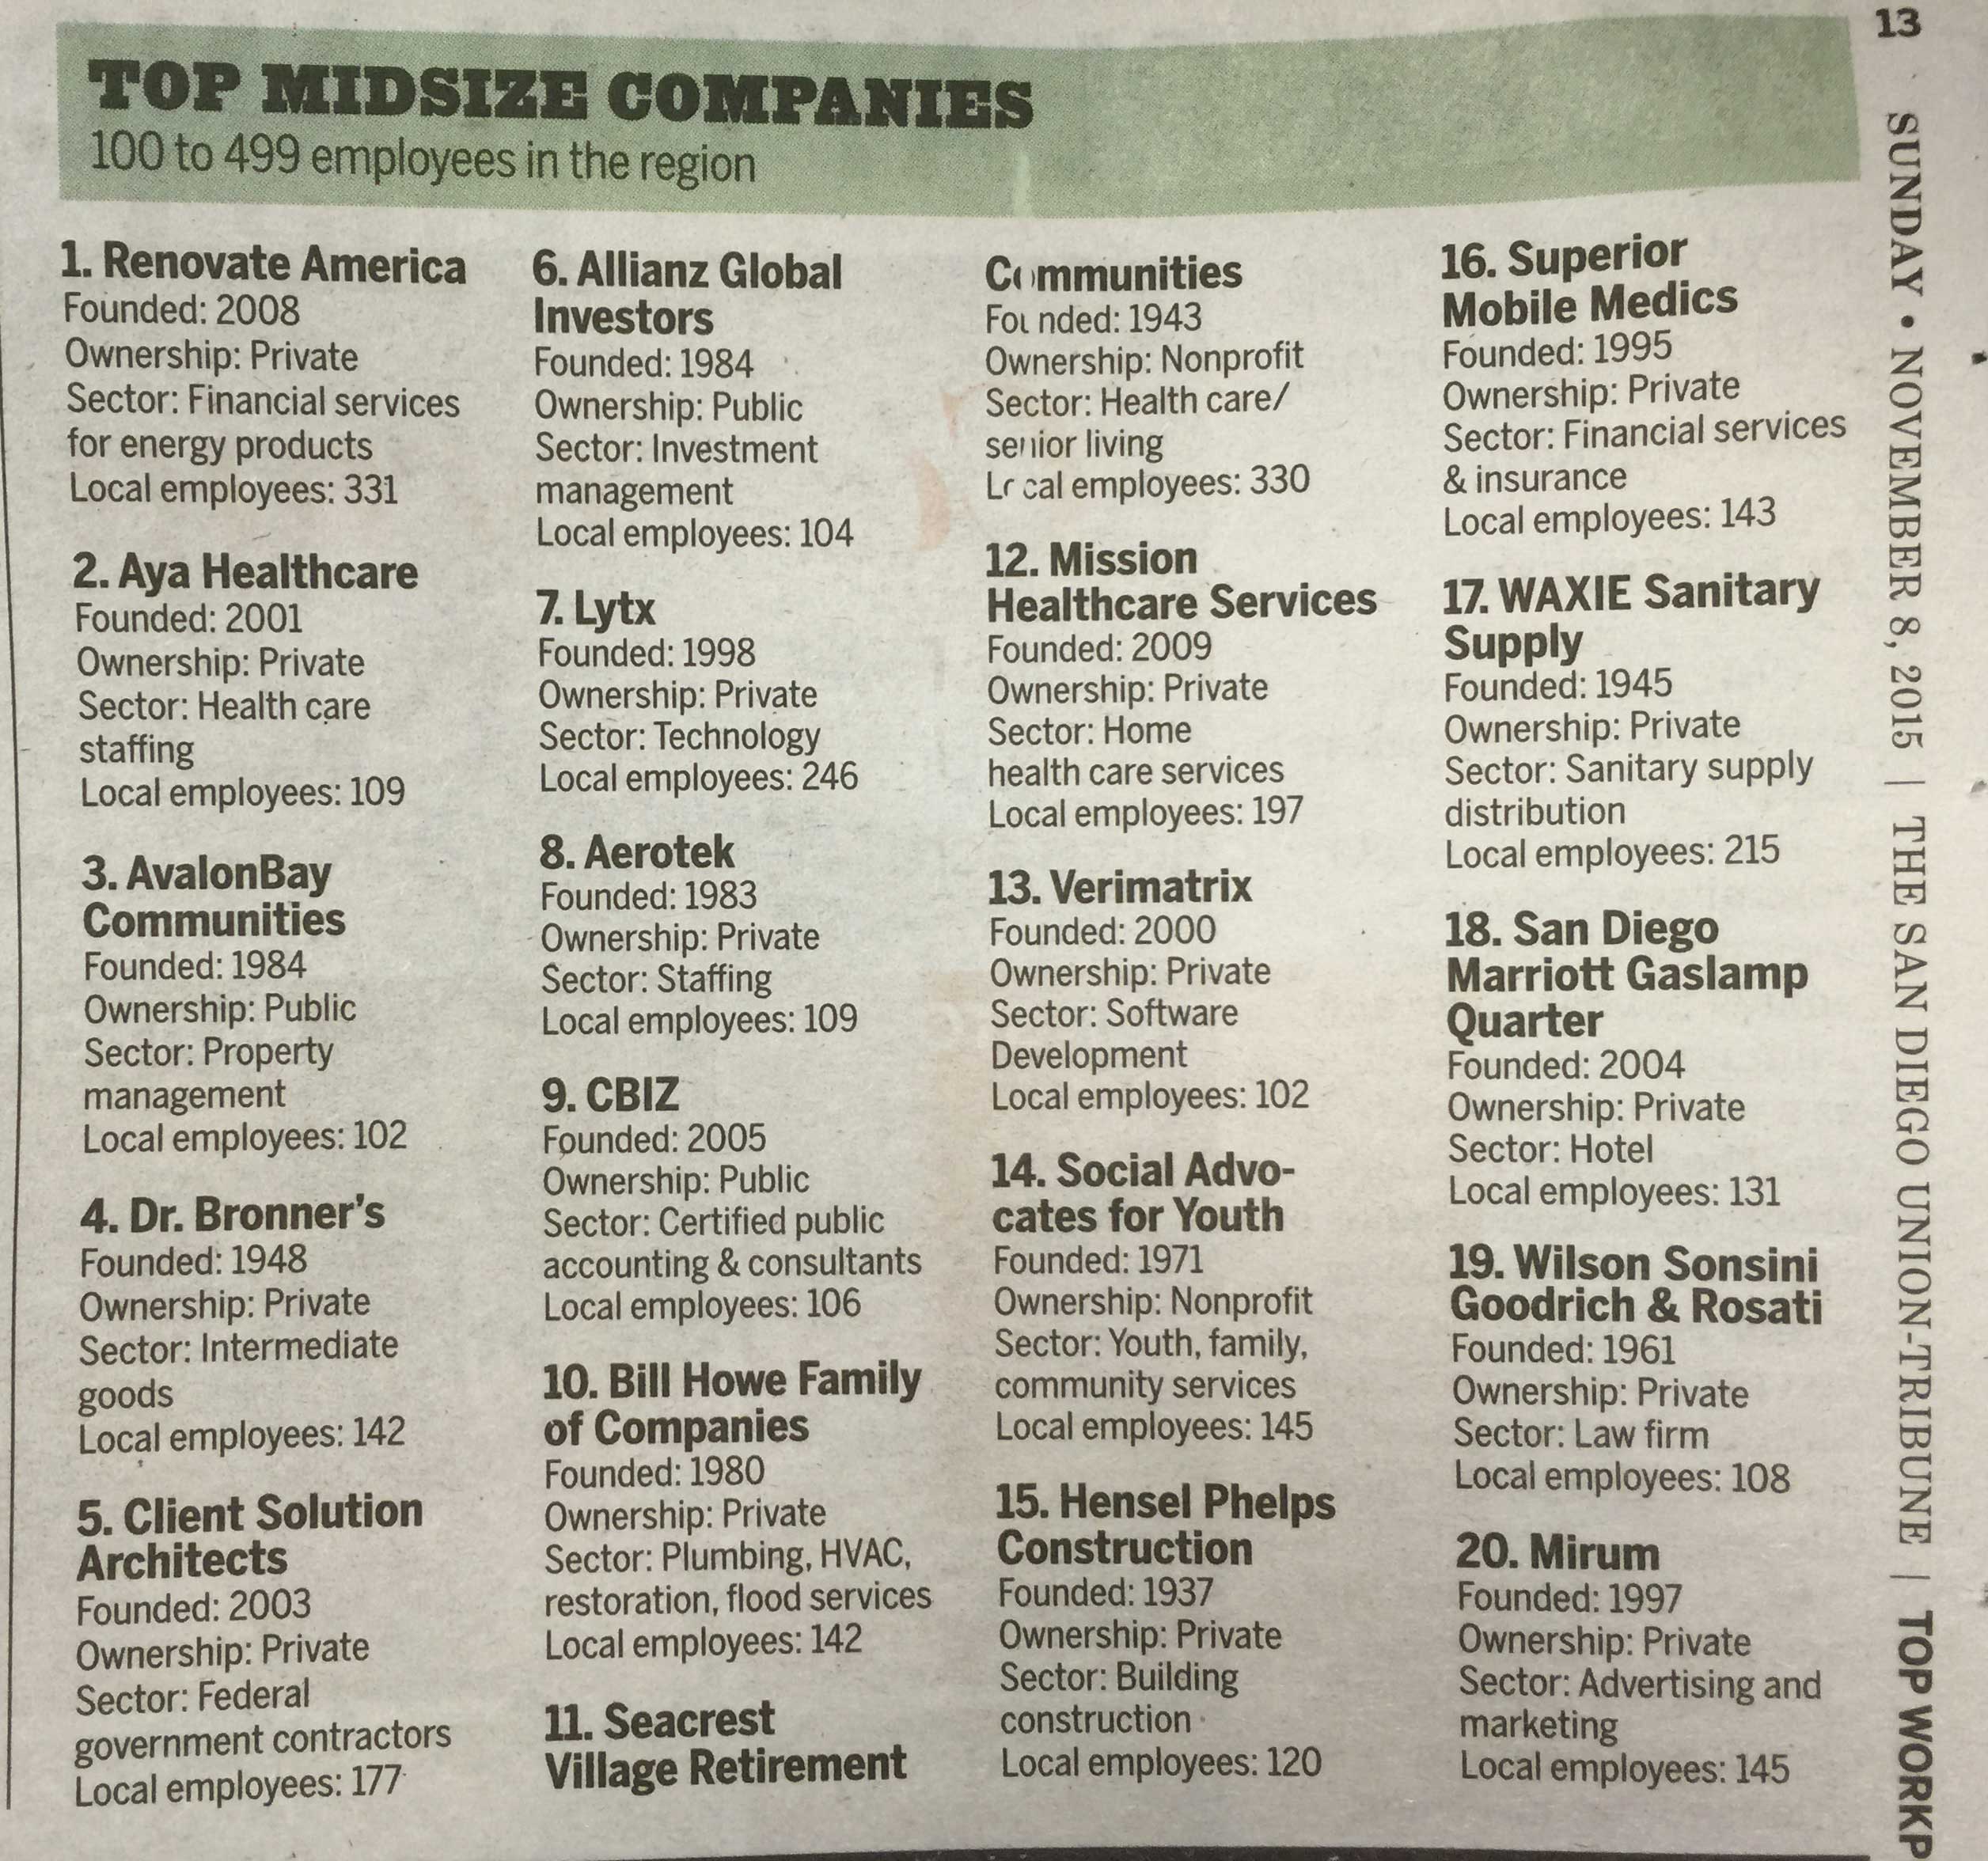 Bill Howe Family of Companies Ranked 10 in Mid-size Category